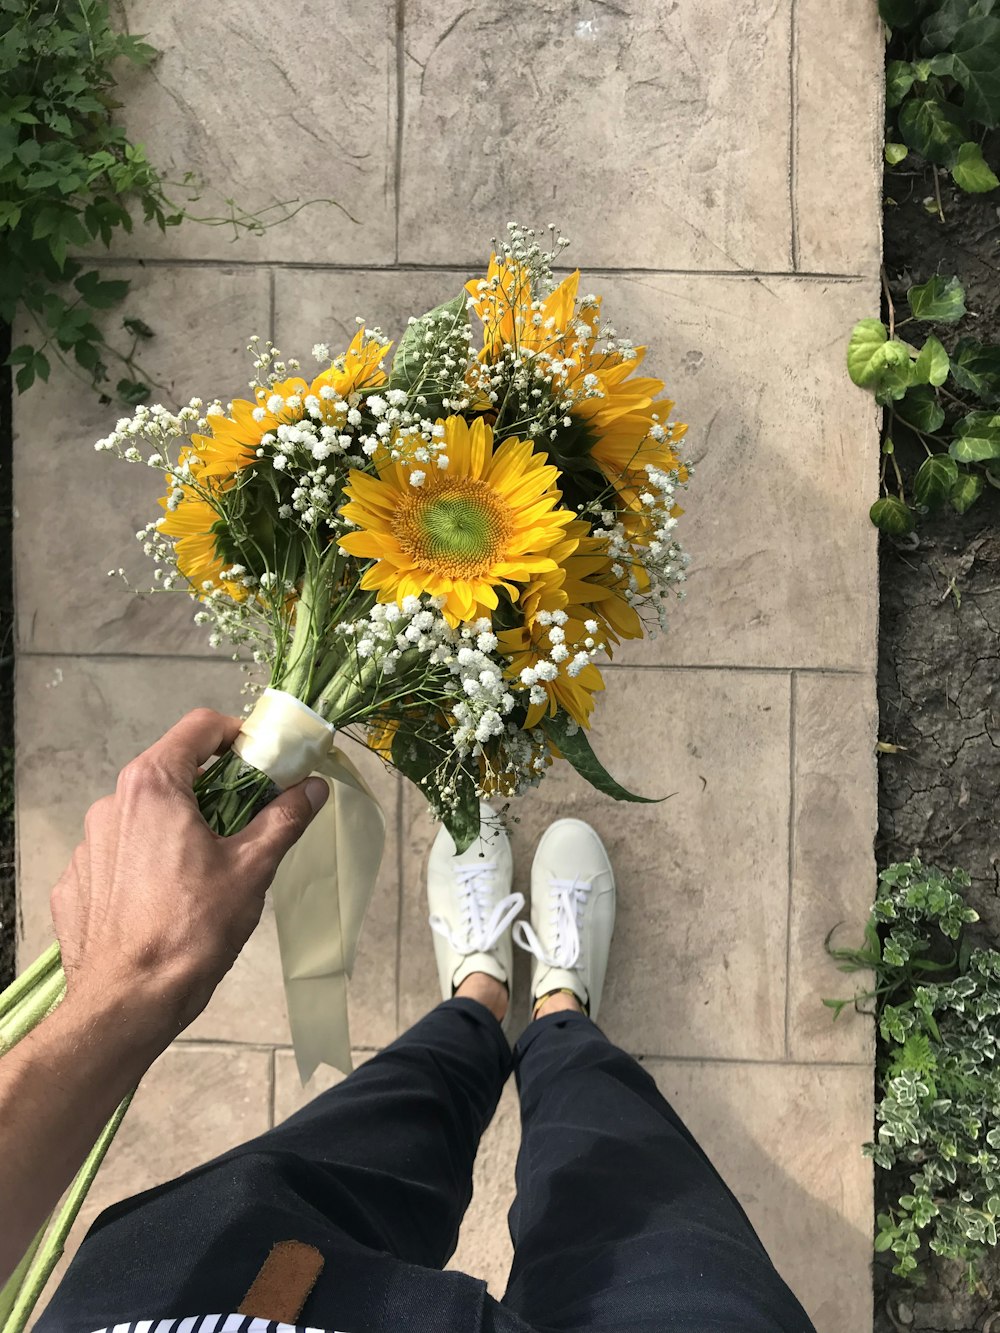 person in black pants and white shoes holding yellow sunflower bouquet